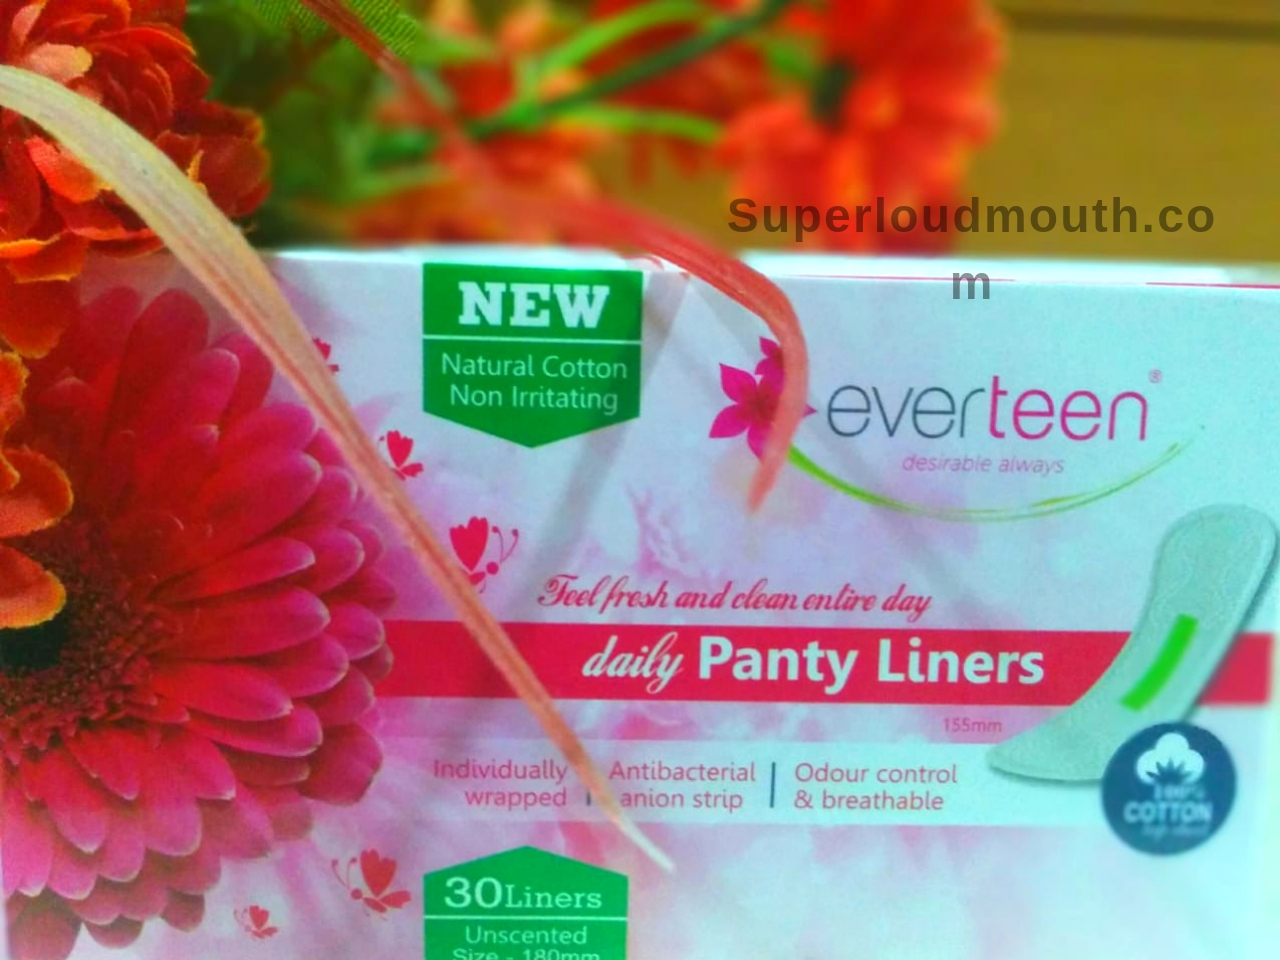 everteen's panty liner review